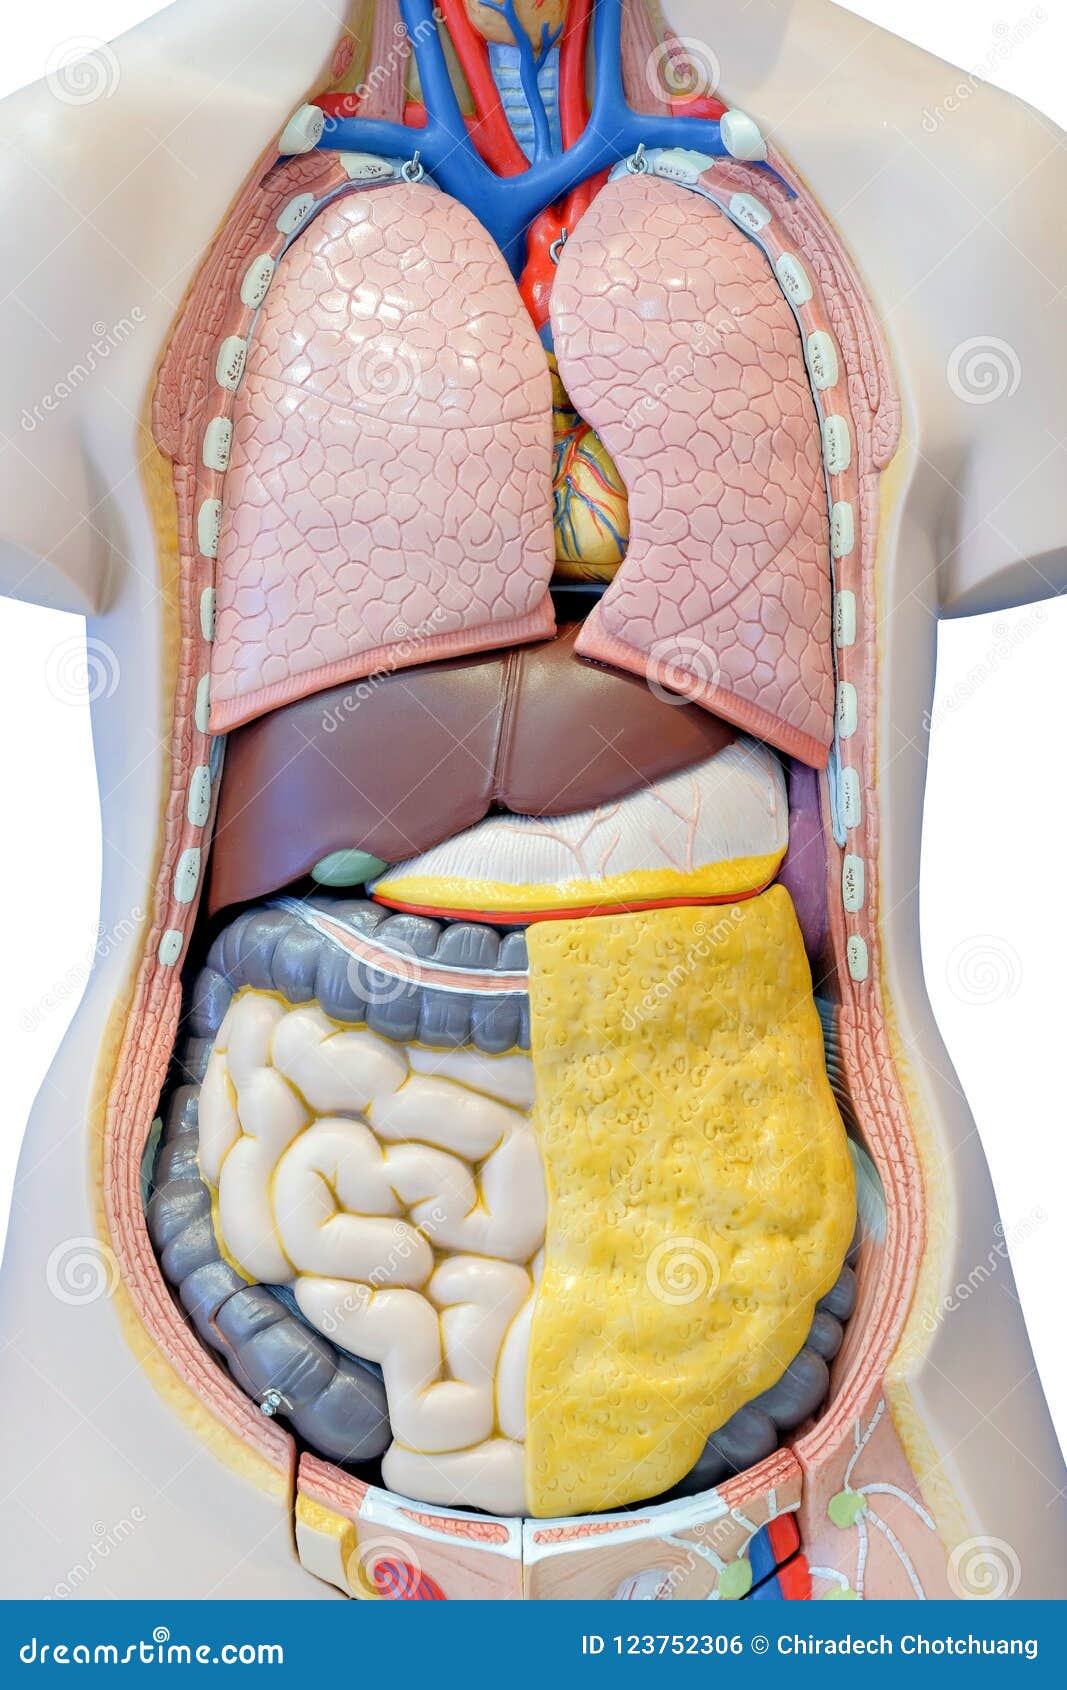 Anatomy Model Of The Internal Organs Of The Human Stock Photo - Image